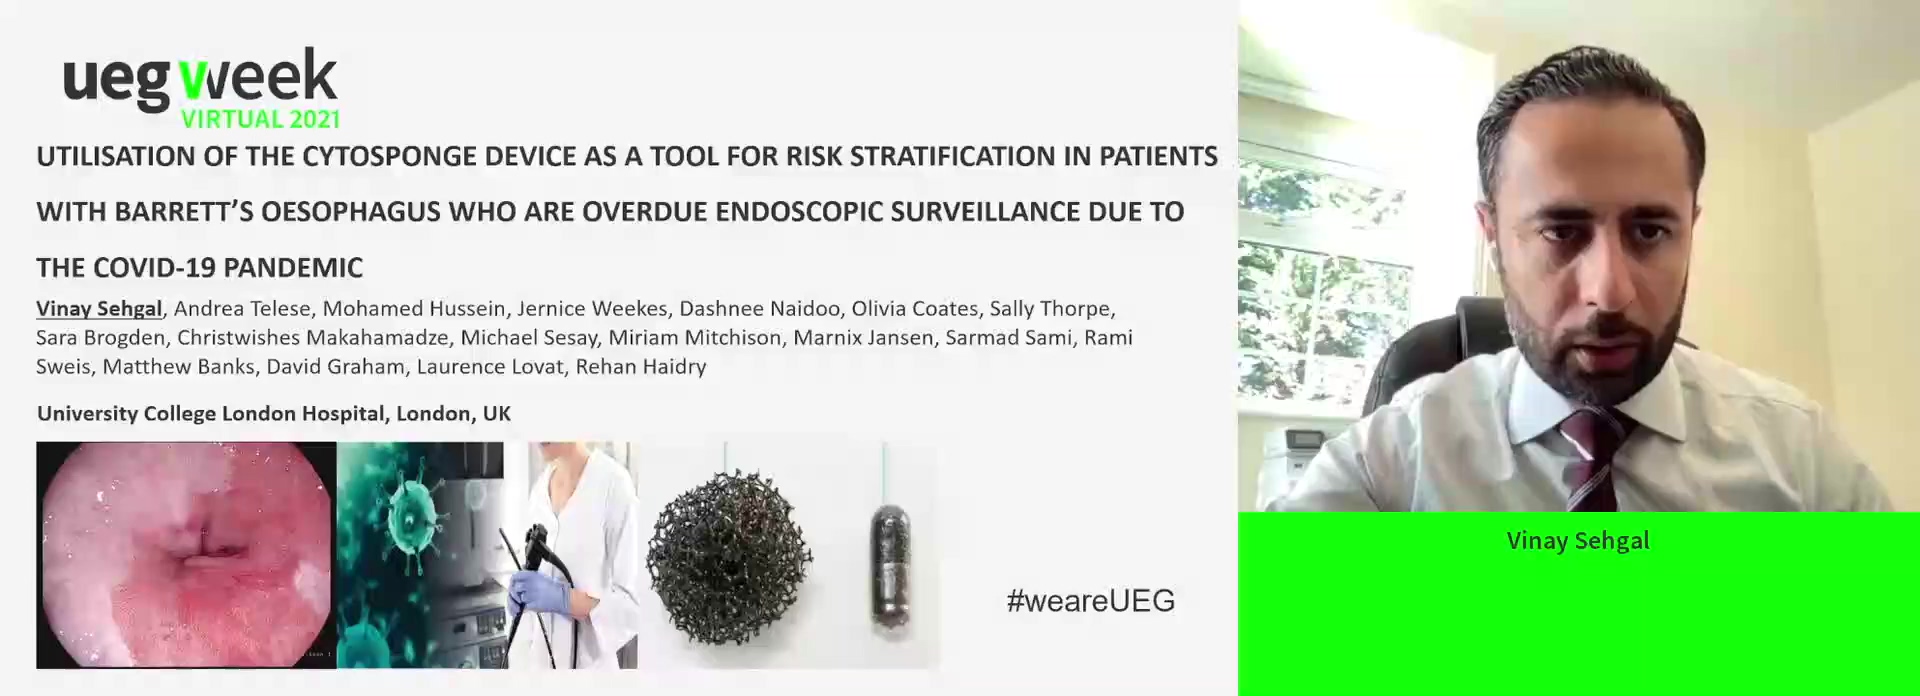 UTILISATION OF THE CYTOSPONGE DEVICE AS A TOOL FOR RISK STRATIFICATION IN PATIENTS WITH BARRETT’S OESOPHAGUS WHO ARE OVERDUE ENDOSCOPIC SURVEILLANCE DUE TO THE COVID-19 PANDEMIC